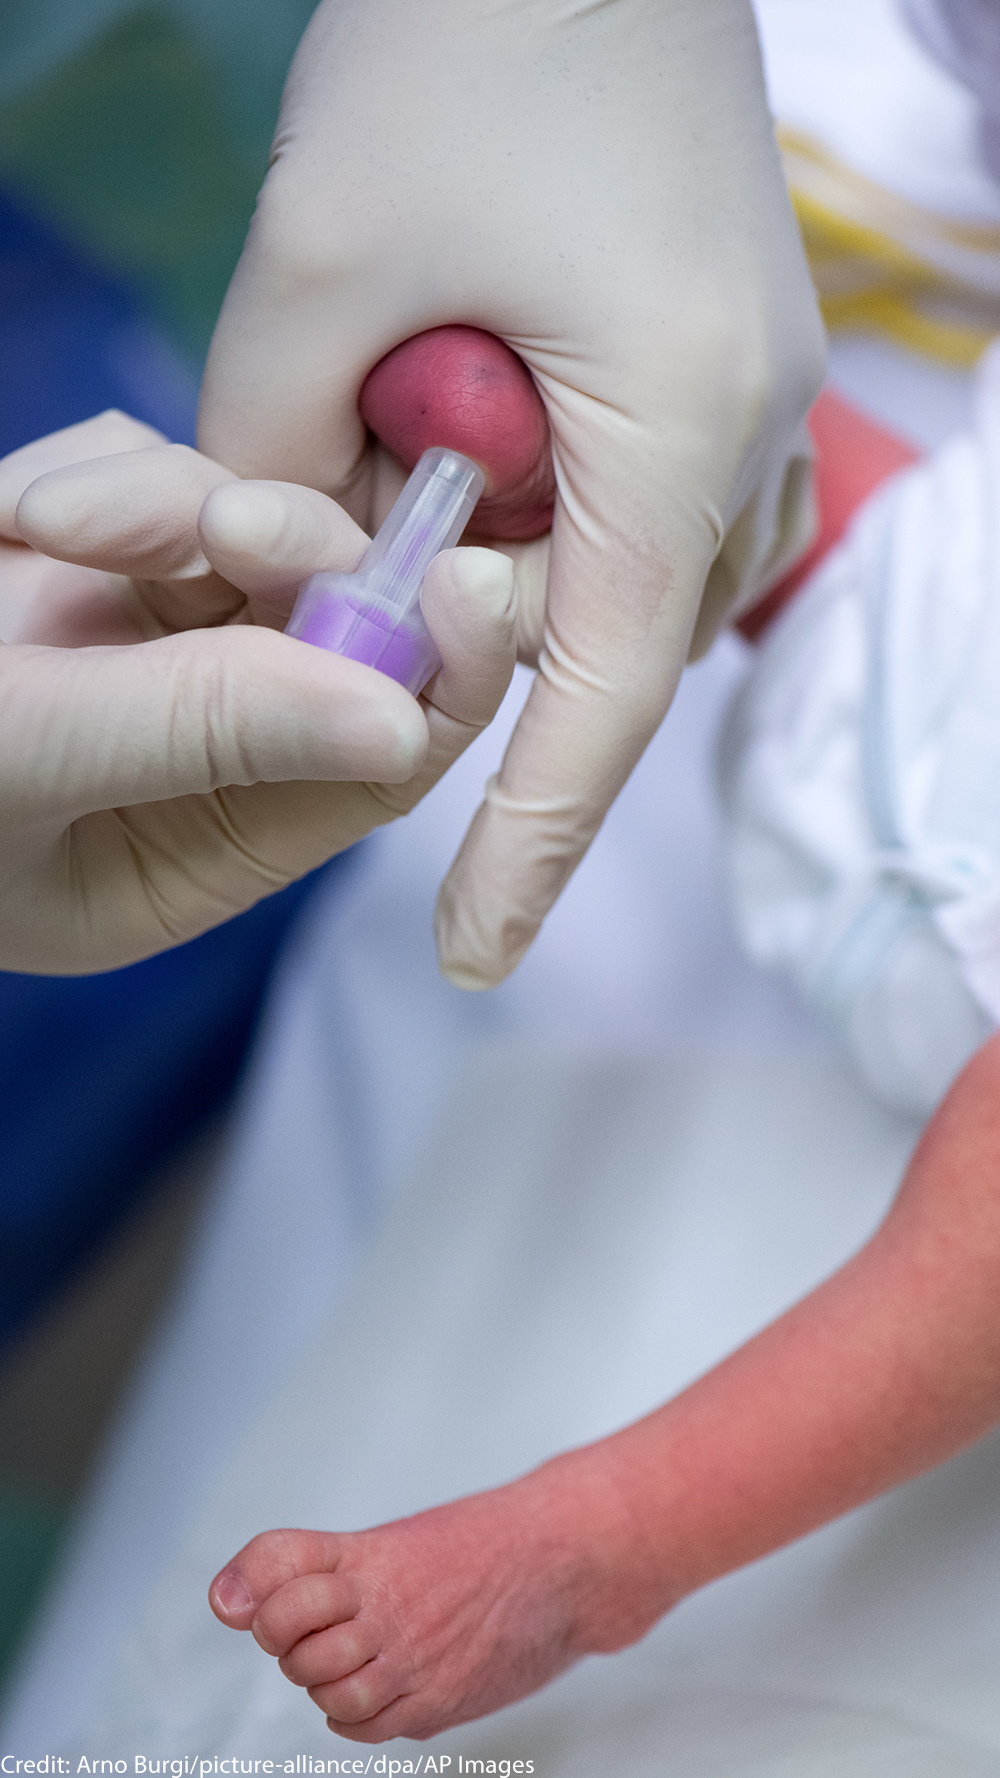 A newborn has its blood drawn from to test for genetic diseases.